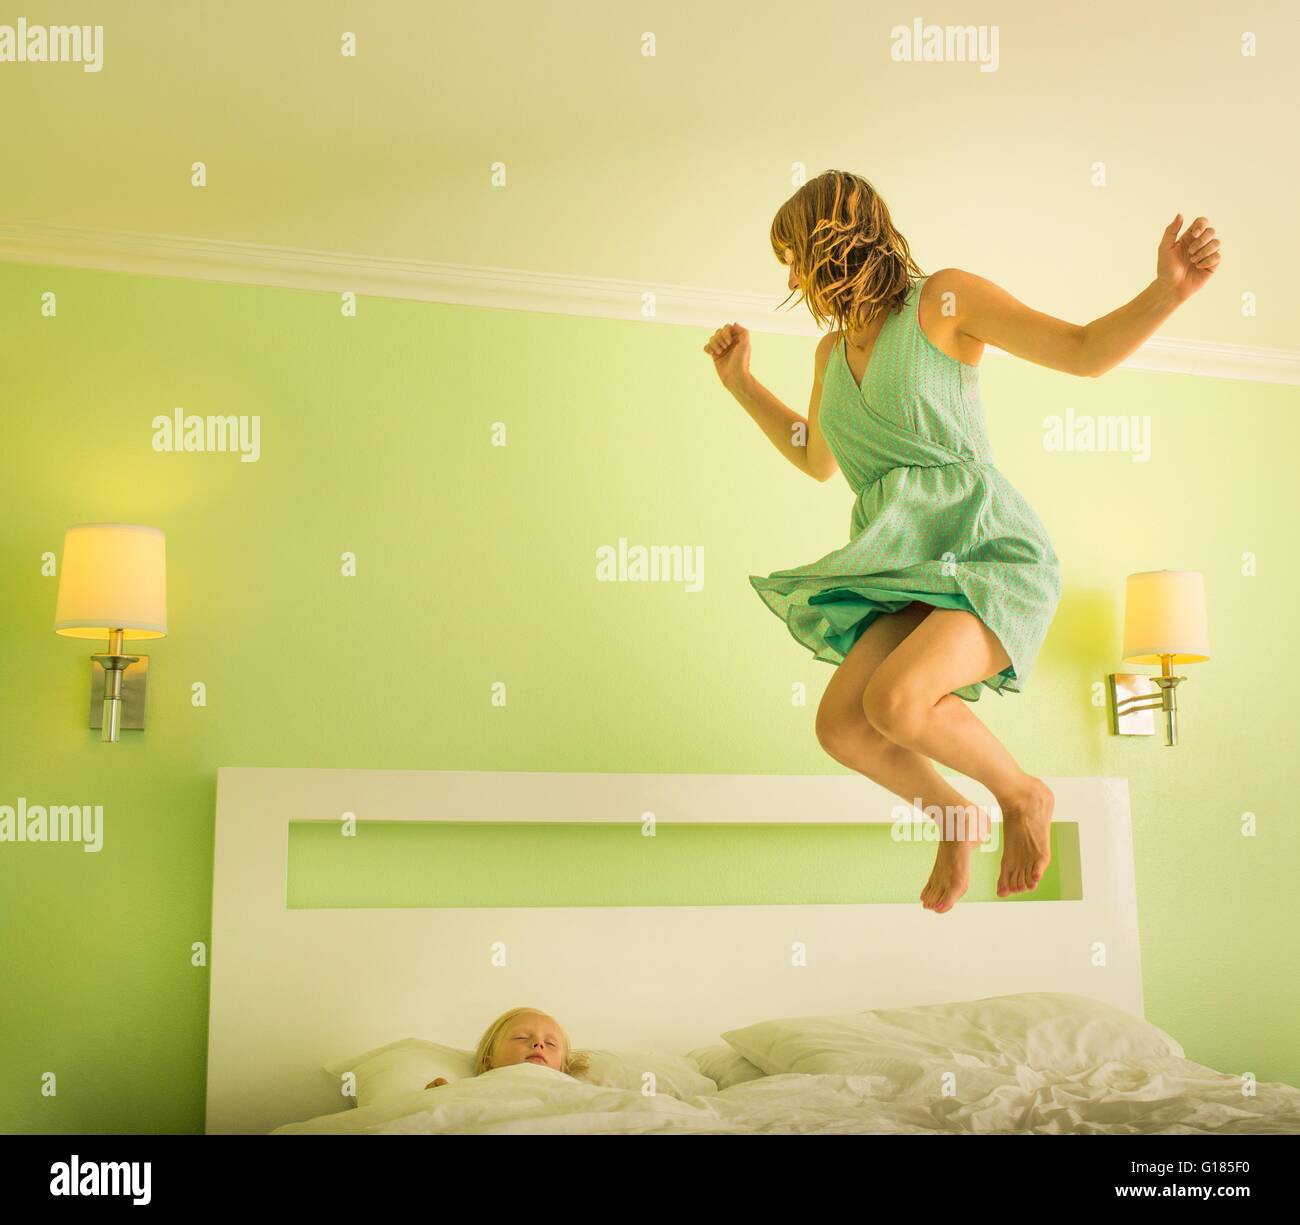 Mother jumping on bed to wake sleeping son Stock Photo